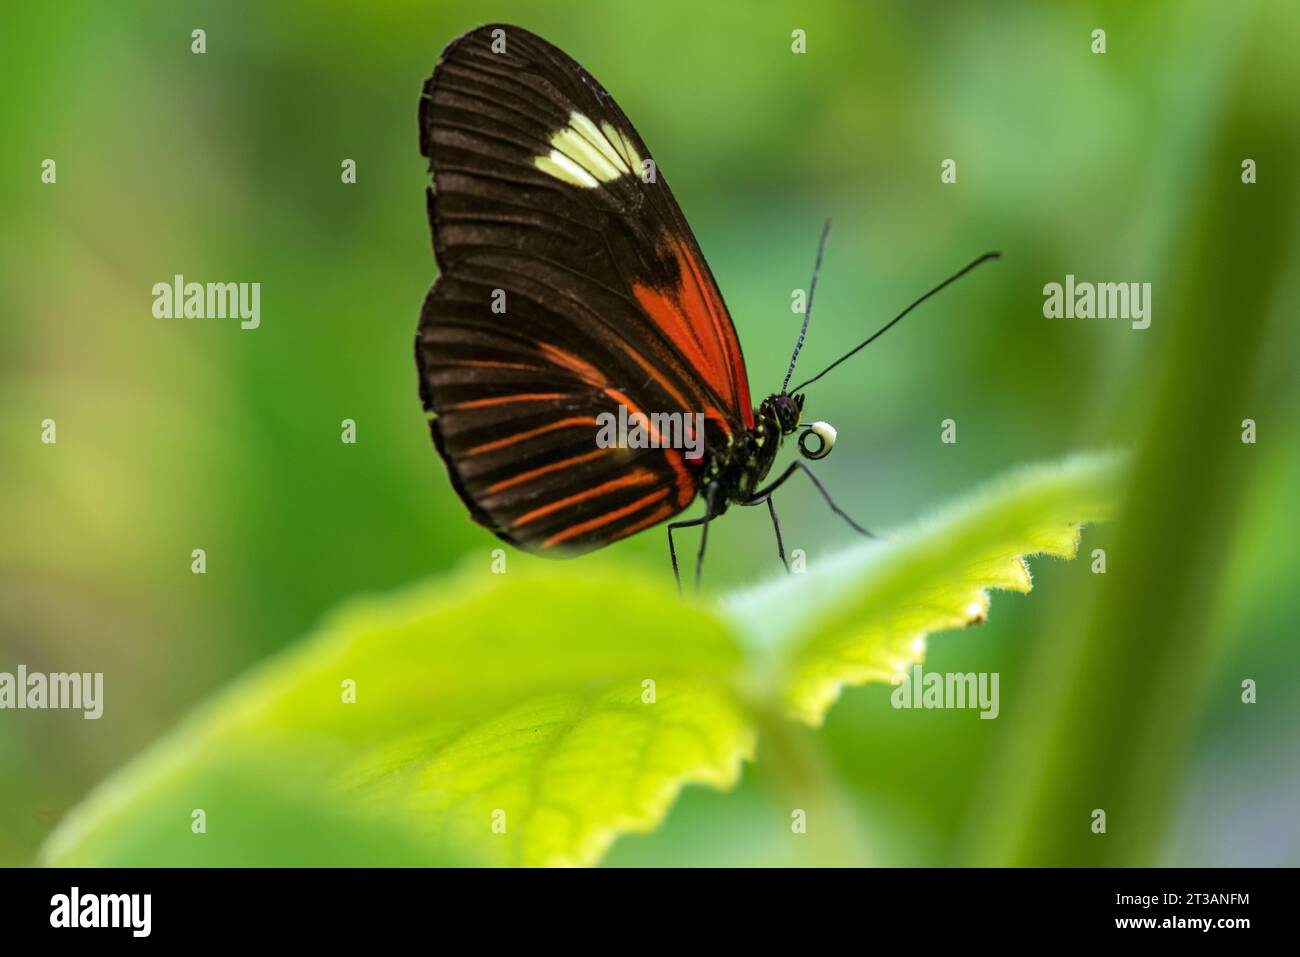 The Doris Longwing Butterfly close up in the garden, heliconius doris, Laparus doris, Tropical butterfly Stock Photo